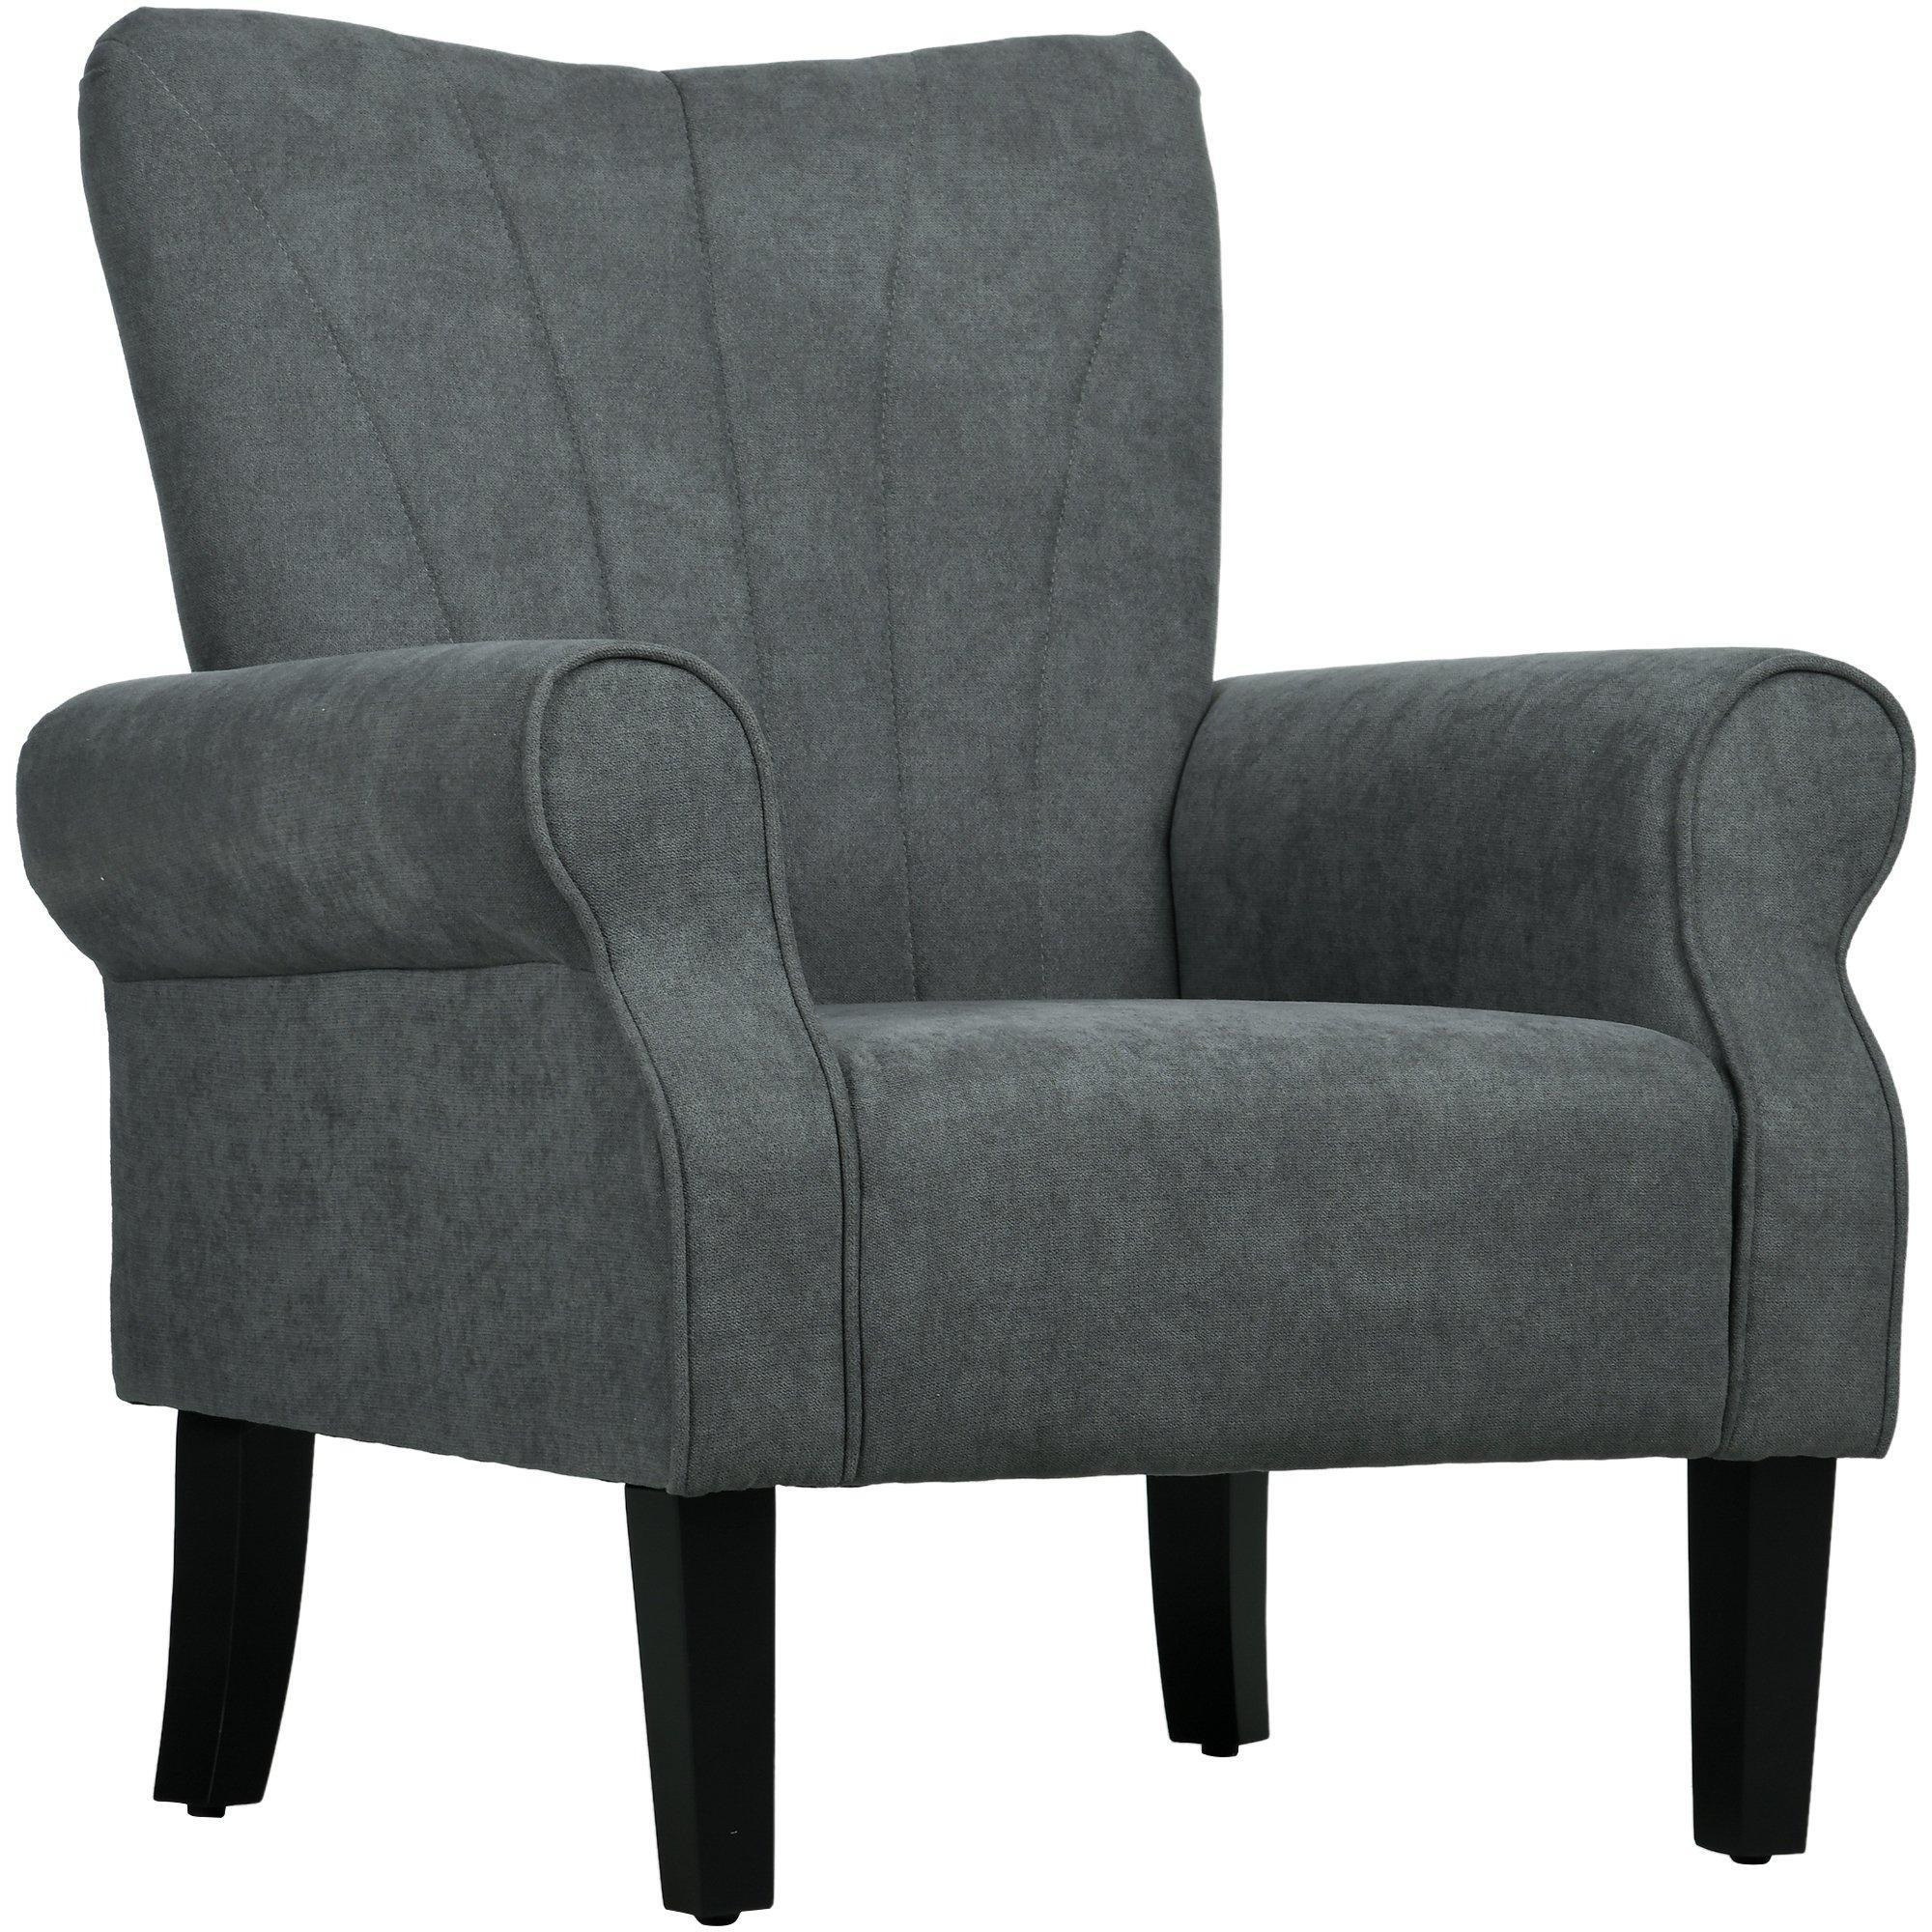 Armchair with High Back and Wood Legs Modern Living Room Chair - image 1